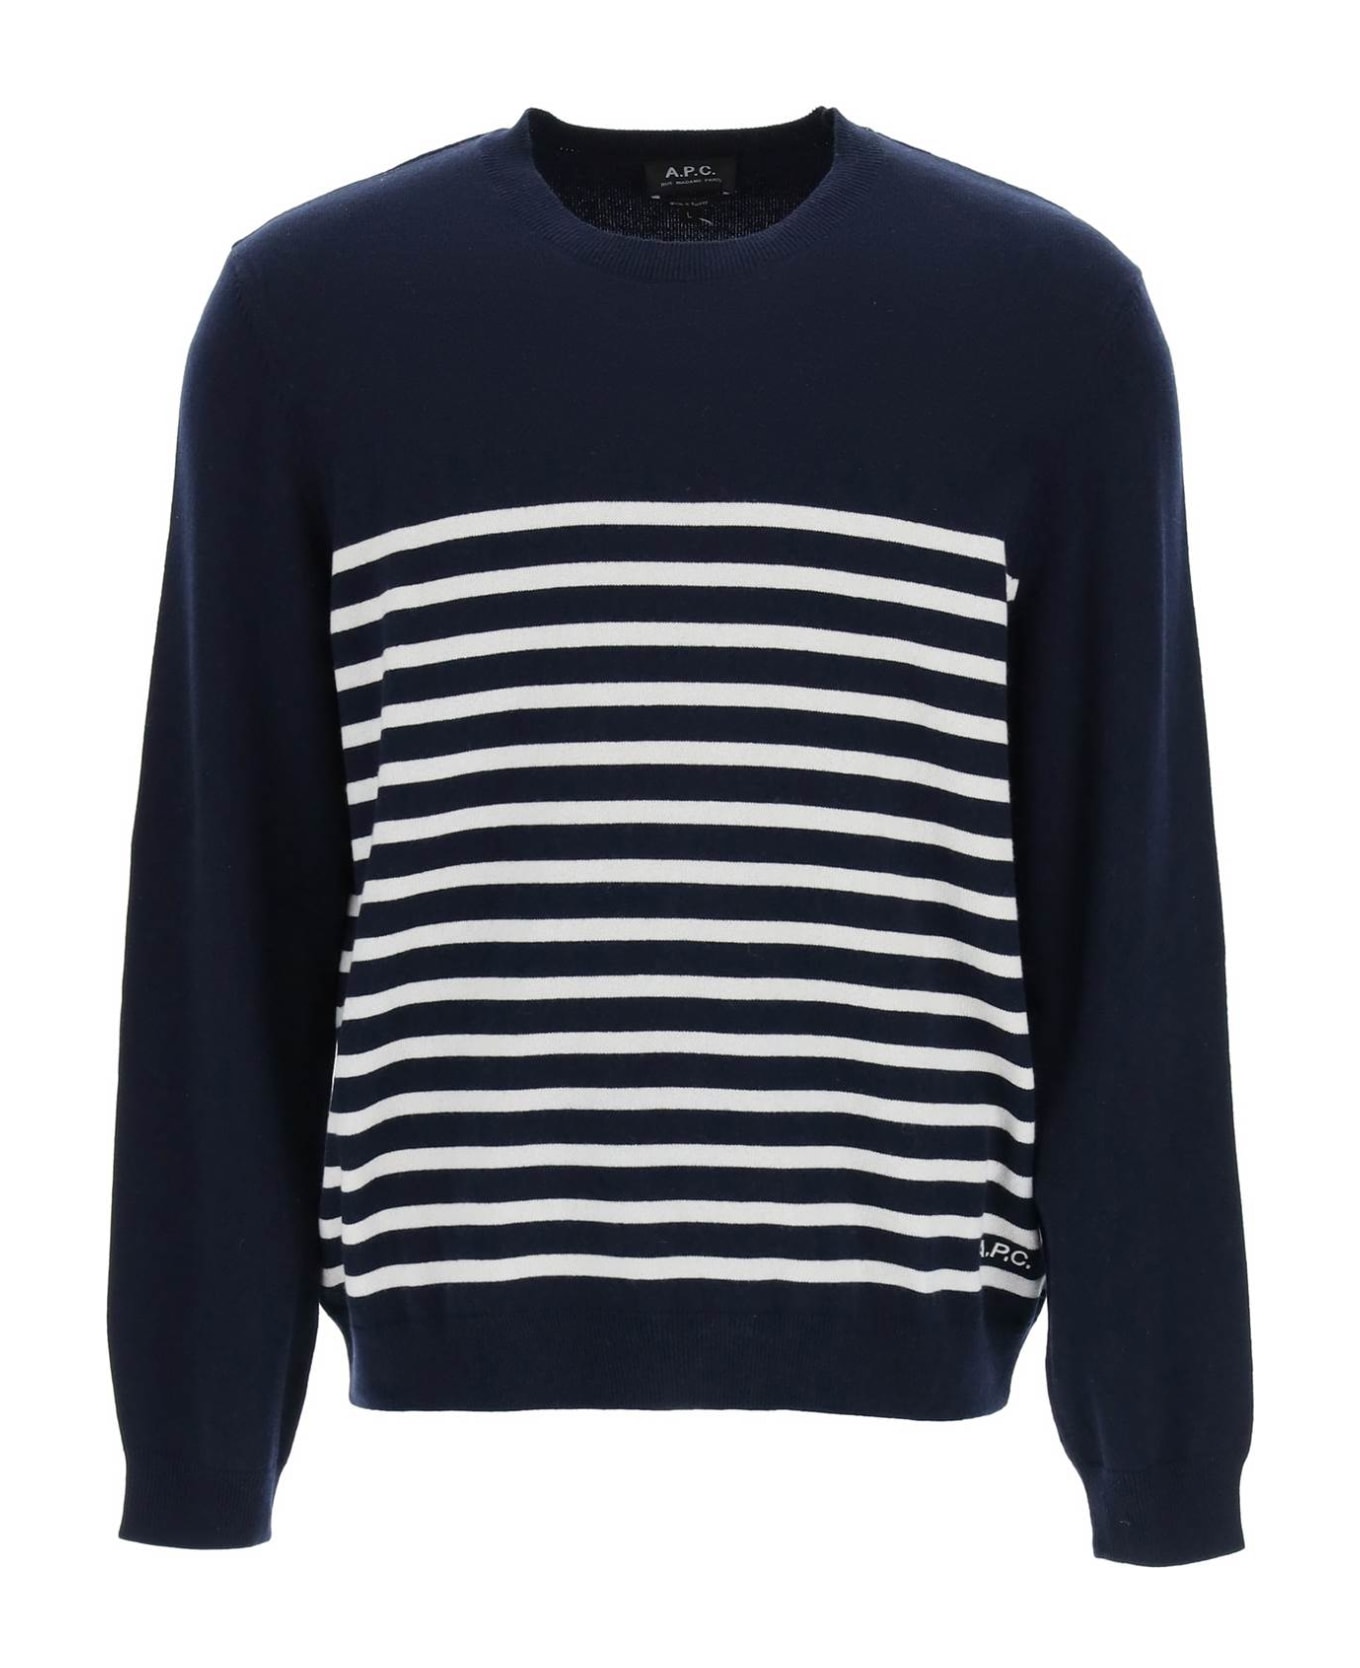 A.P.C. Striped Cashmere And Cotton Pullover - DARK NAVY ニットウェア